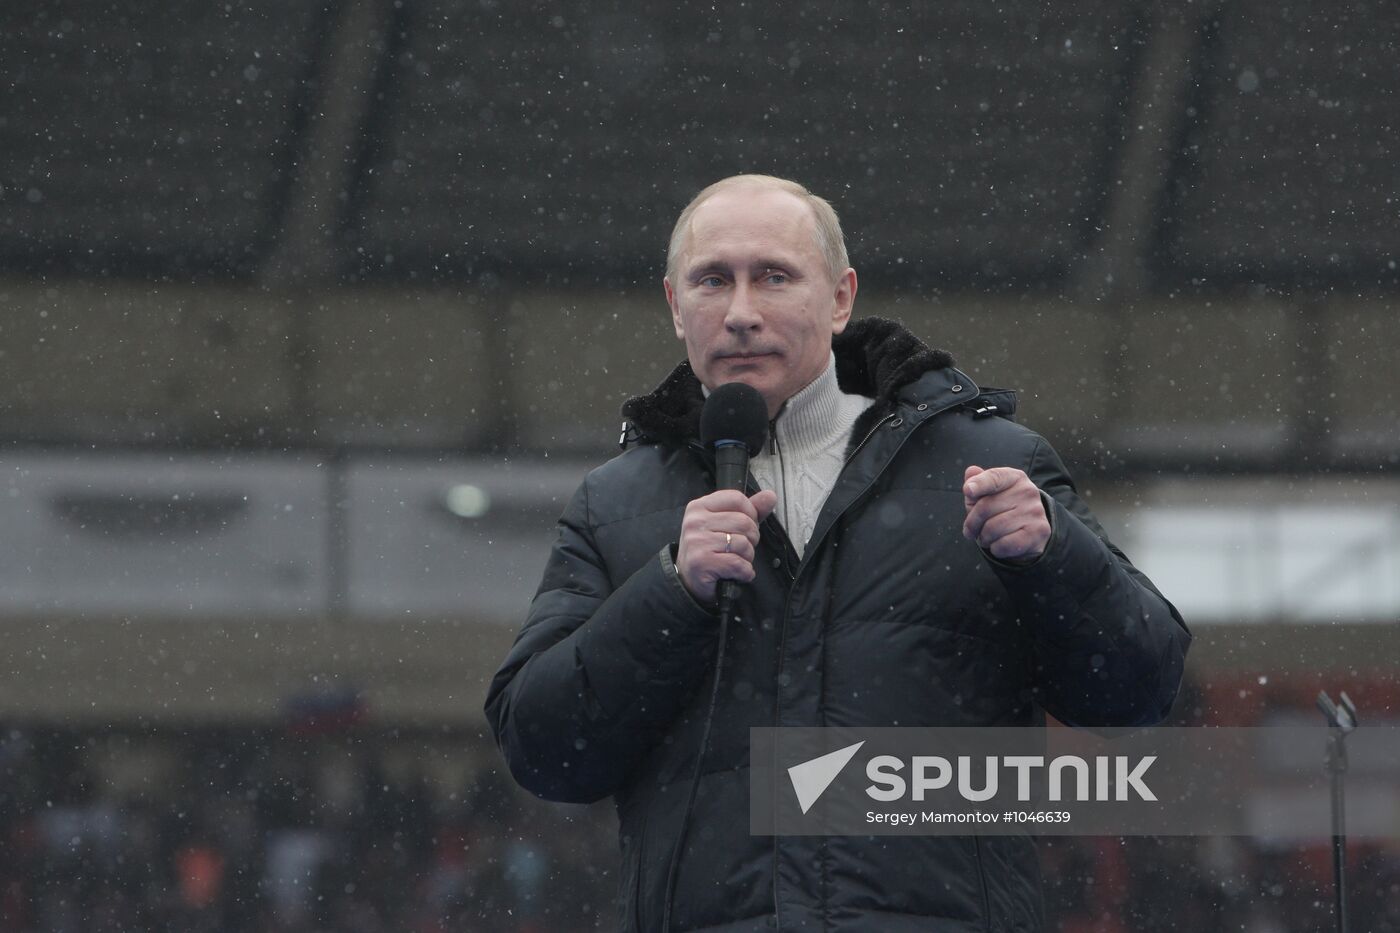 Vladimir Putin speaks to supporters at "Defend the Nation!"rally